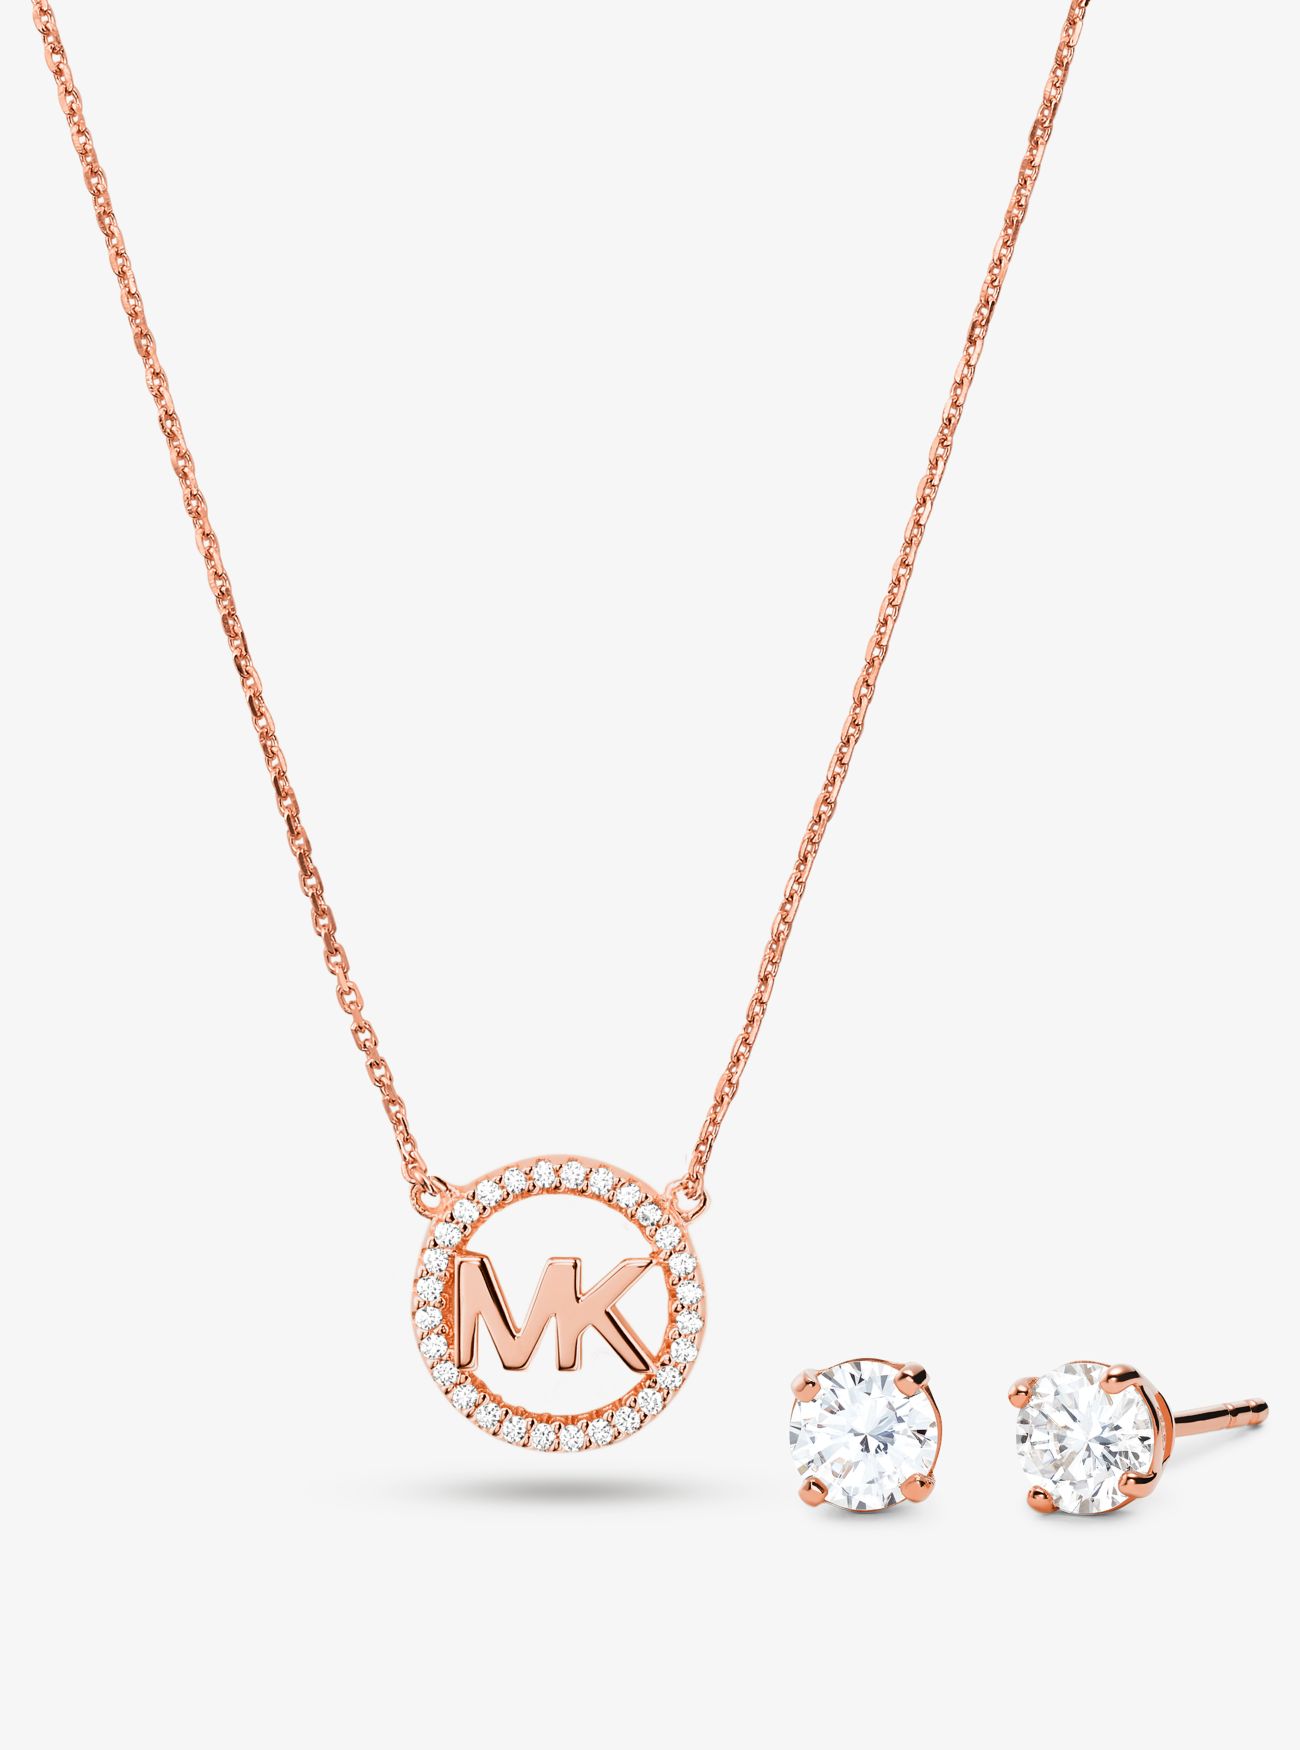 MK 14K Rose Gold-Plated Sterling Silver Pavé Logo Charm Necklace and Stud Earrings Set - Rose Gold - Michael Kors